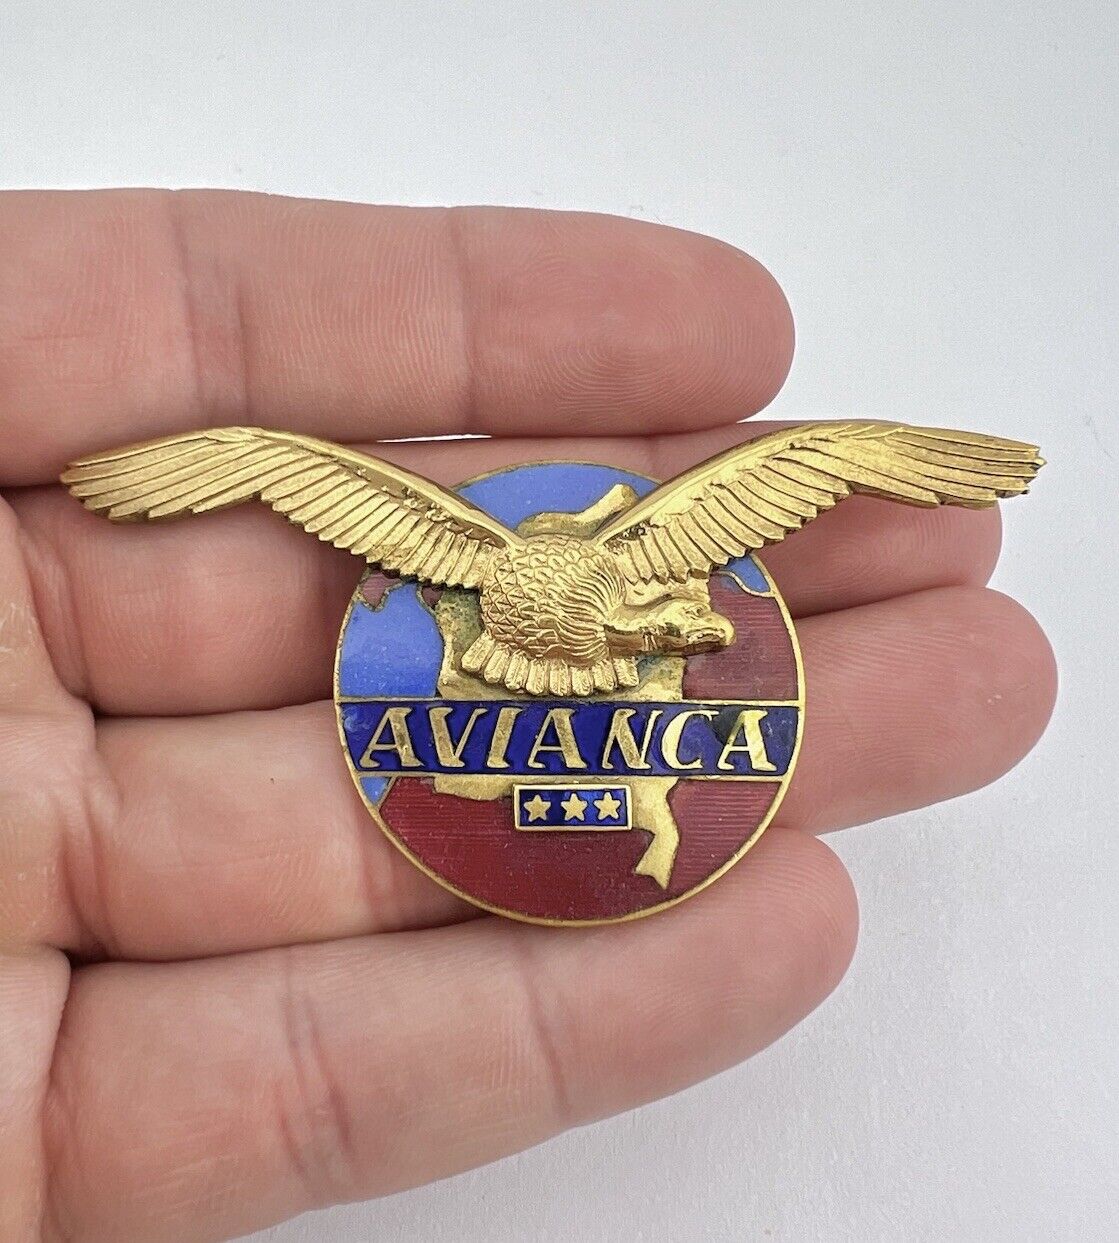 1940s Avianca Colombian Airline Affiliate of Pan Am PAA Pilot Pin Badge Wings